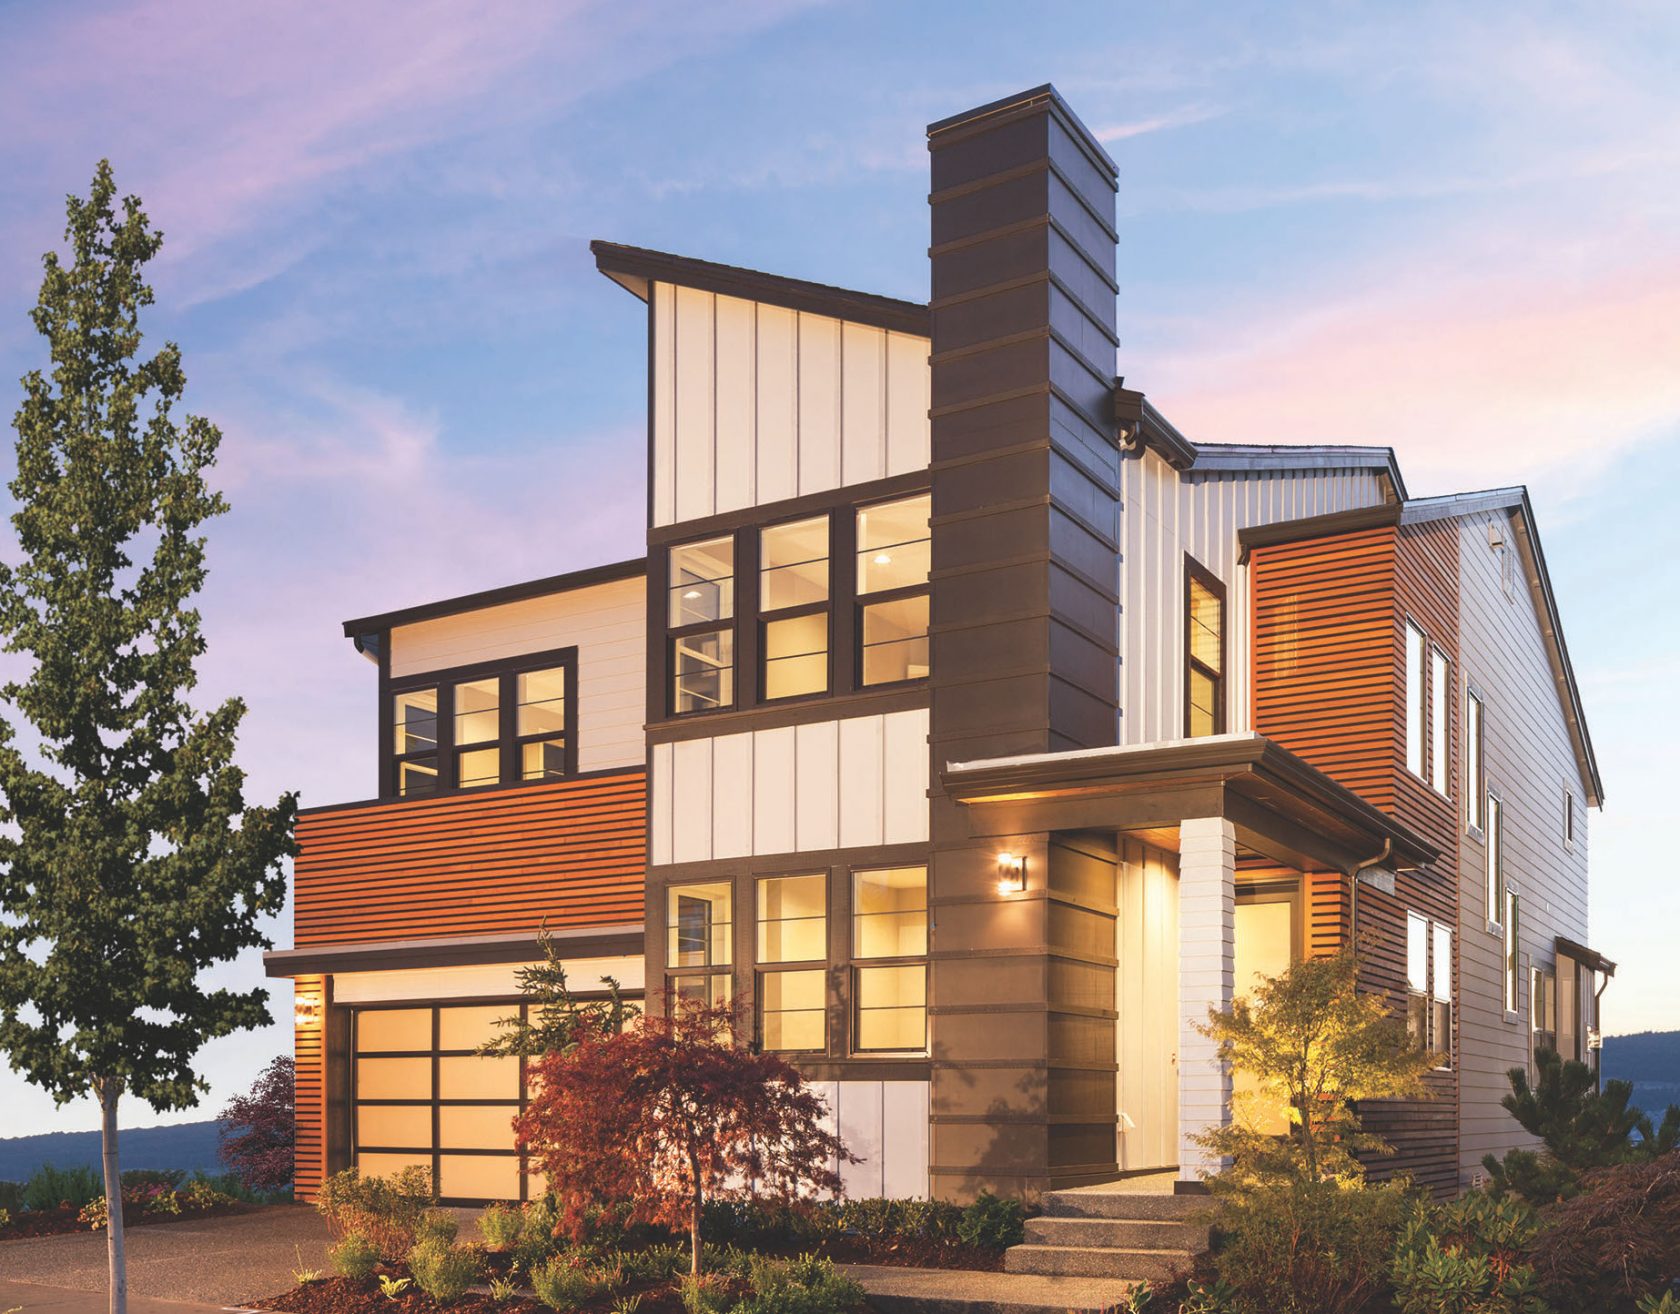 Exterior of a modern single family house in Portland, Oregon.